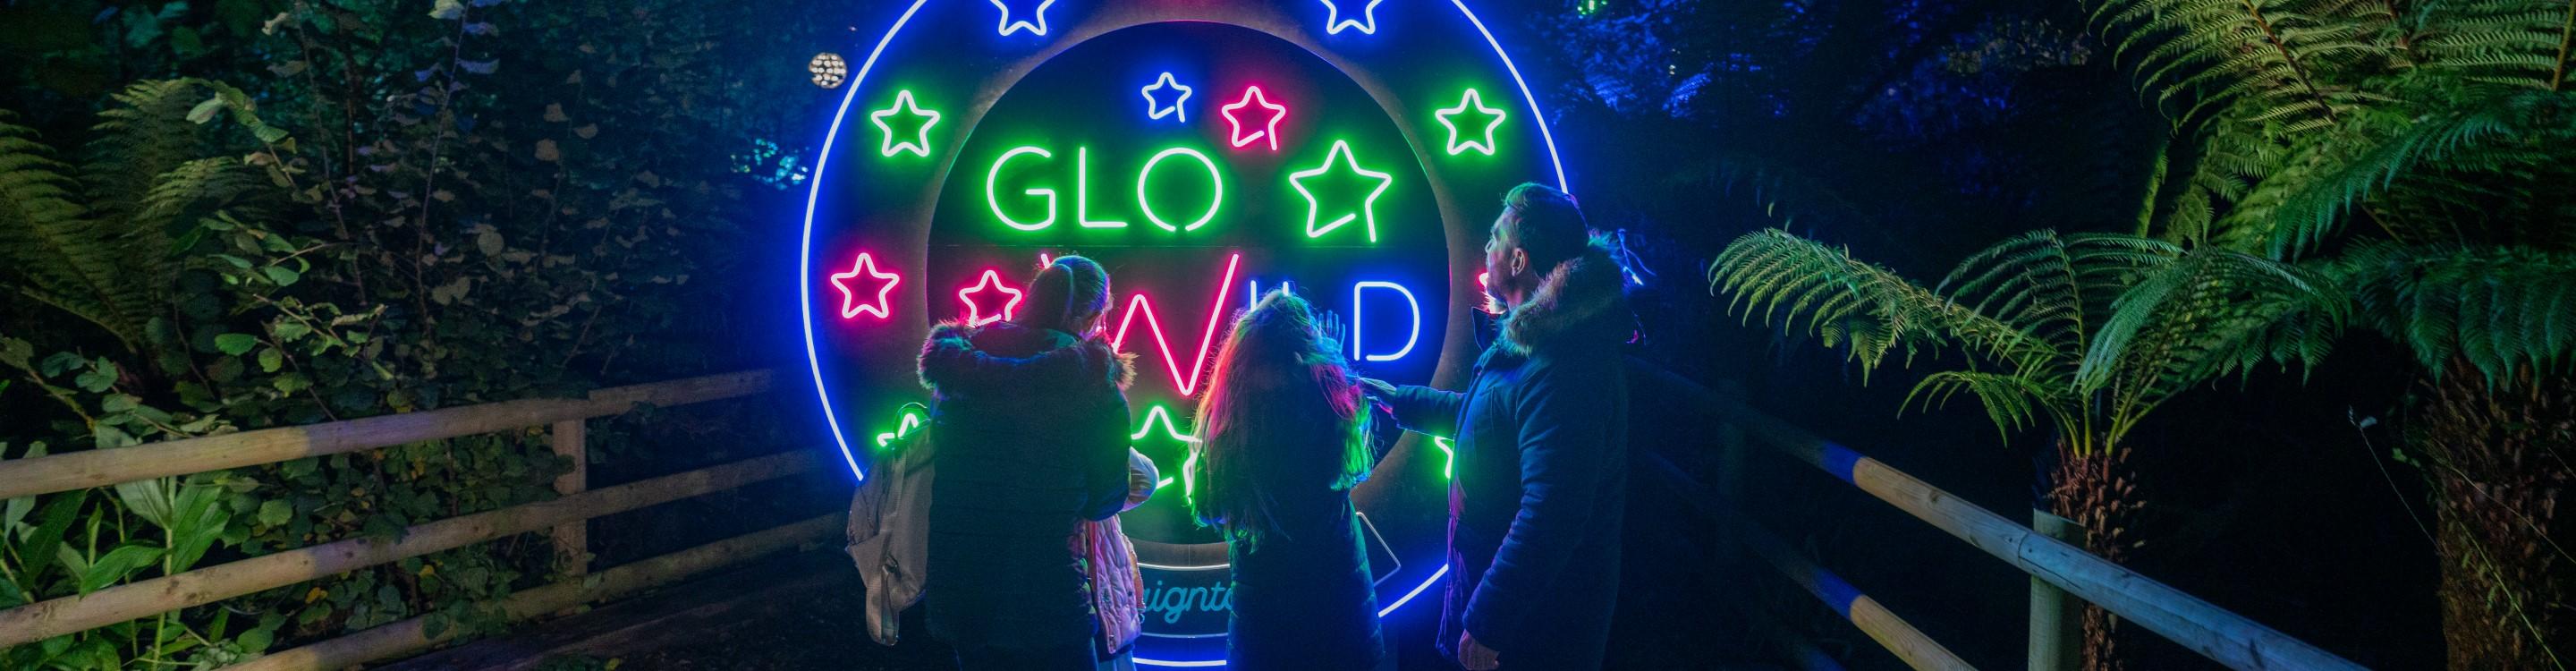 A family at Paignton Zoo at night, looking at the GloWild sign, illuminated in neon blue, green and pink